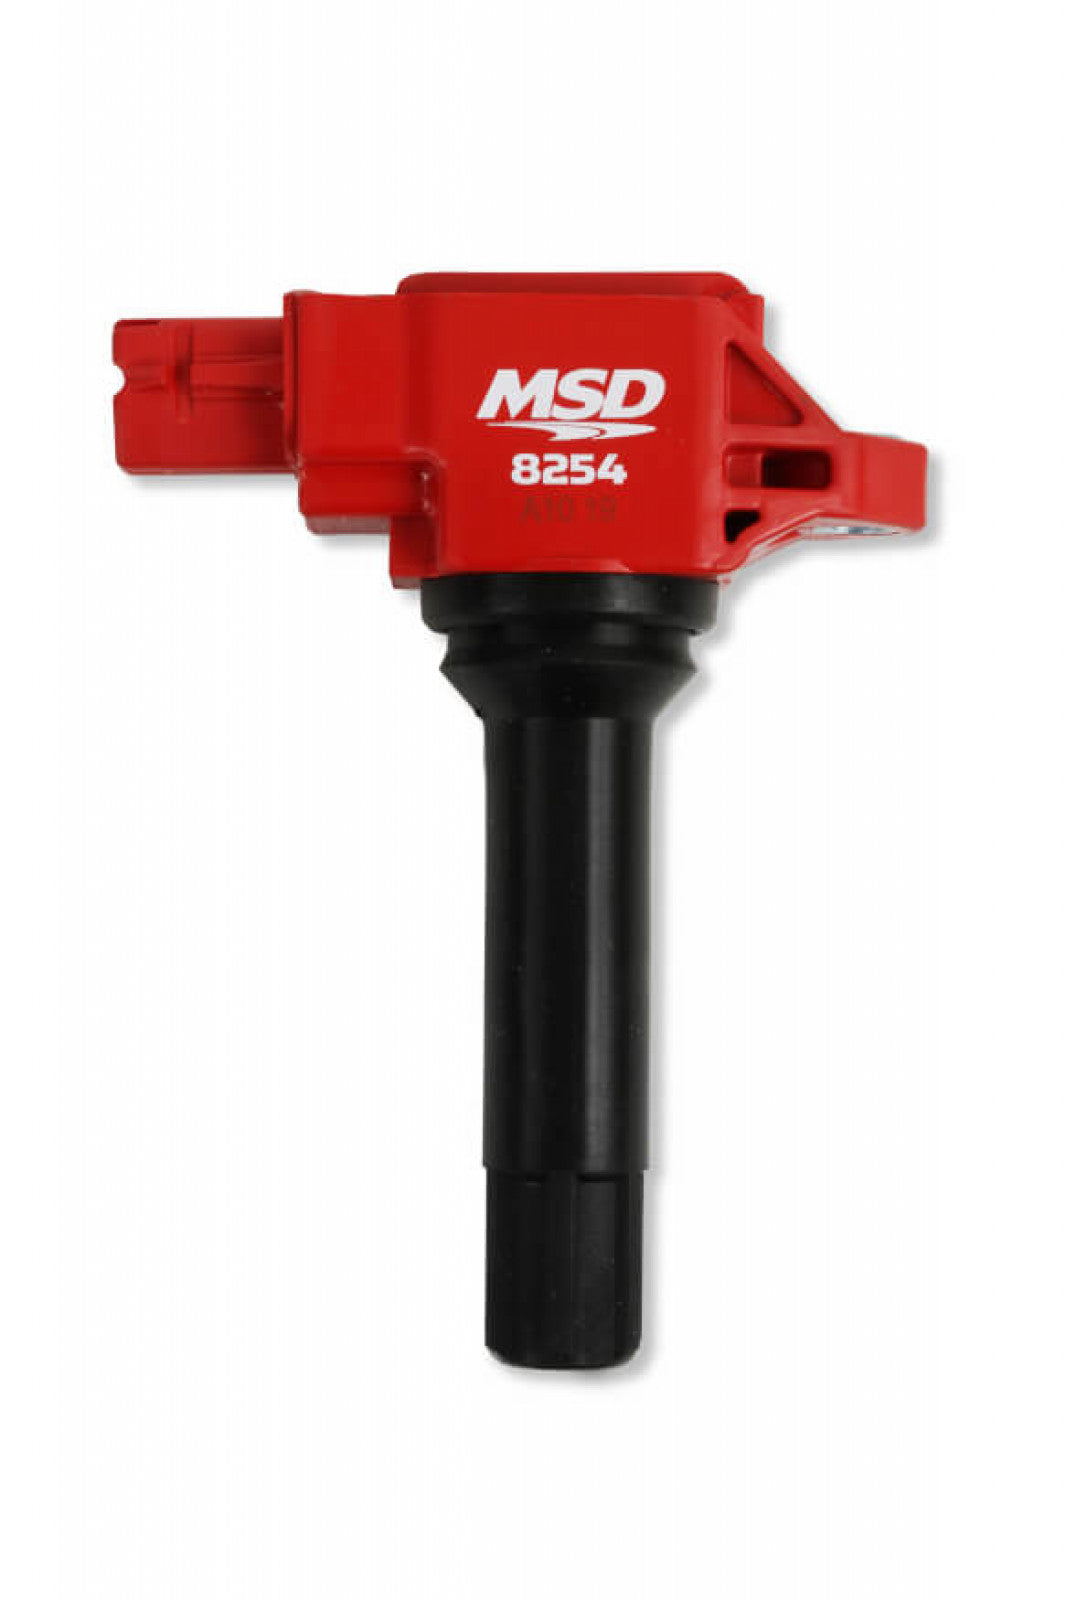 MSD Ignition Coil - Blaster Series  - Subaru/Toyota/Scion H4 - 2.0L - Red - 4-Pack